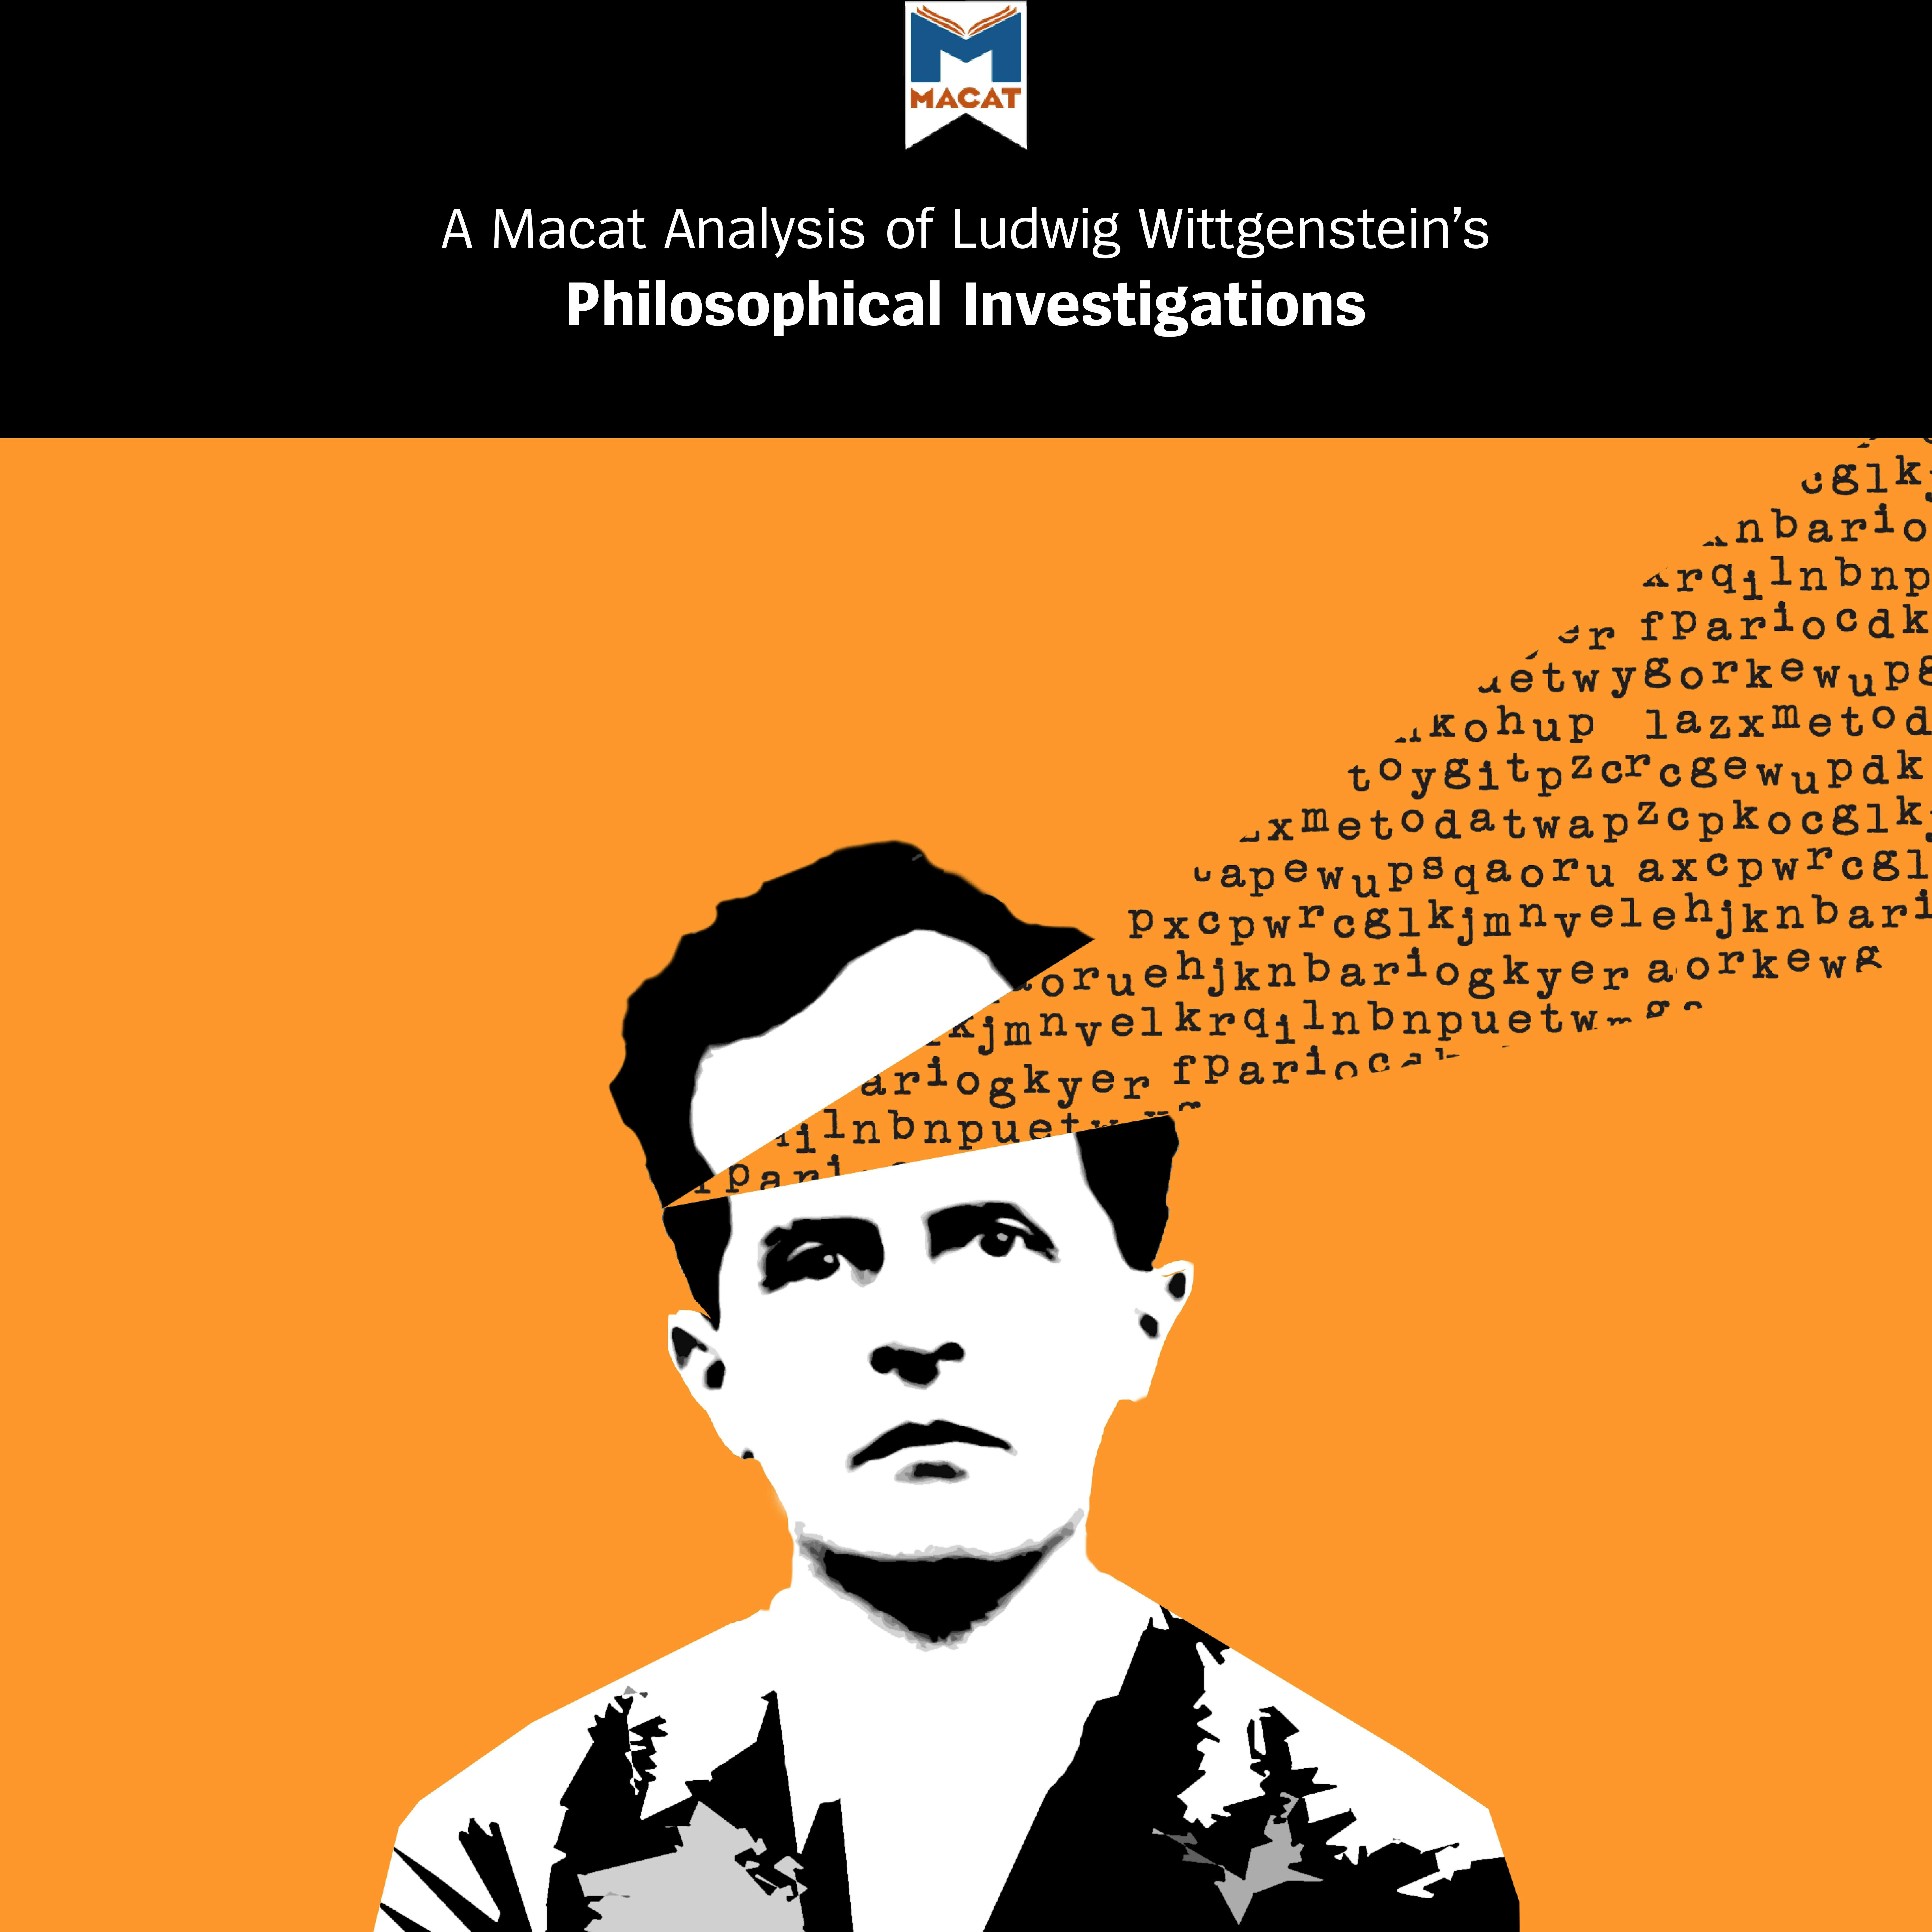 A Macat Analysis of Ludwig Wittgenstein's Philosophical Investigations - undefined